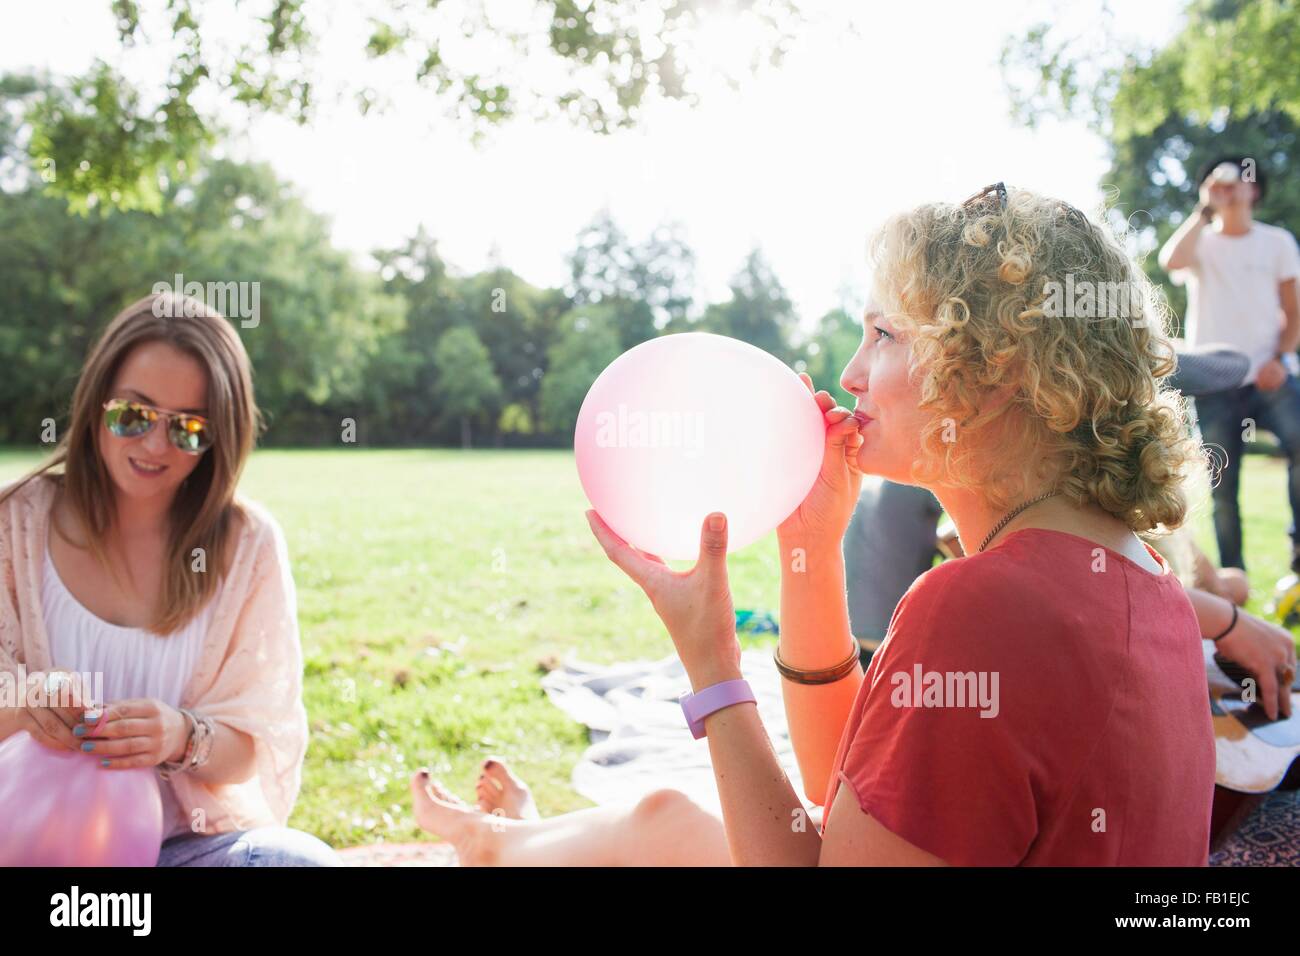 Young woman blowing up balloon at park party Stock Photo